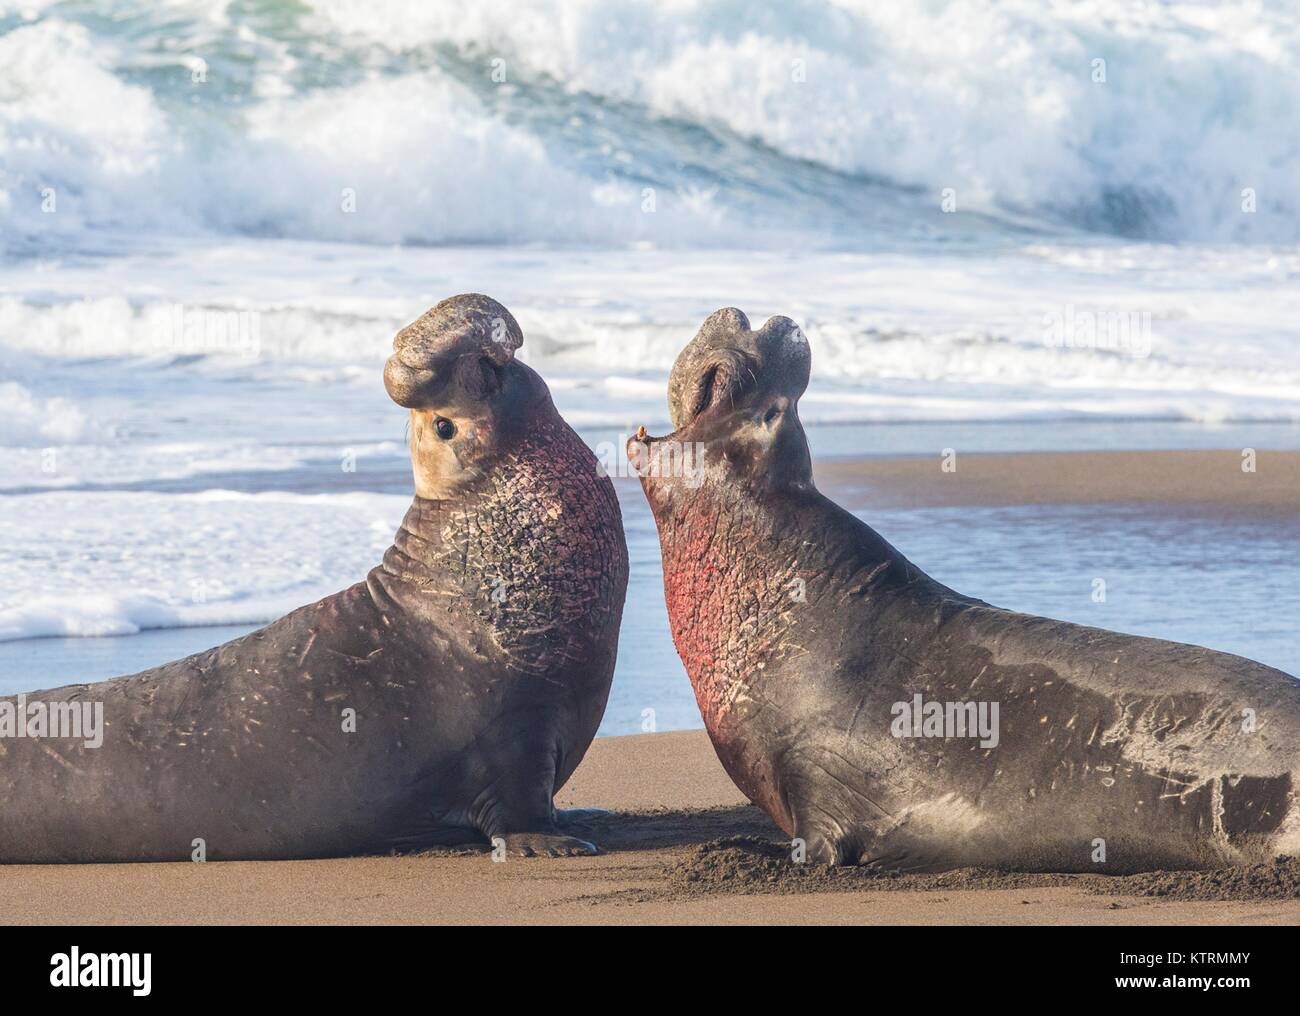 Northern elephant seals beach themselves on the shore at the Piedras Blancas Light Station Outstanding Natural Area January 19, 2017 in Point Piedras Blancas, California. Stock Photo